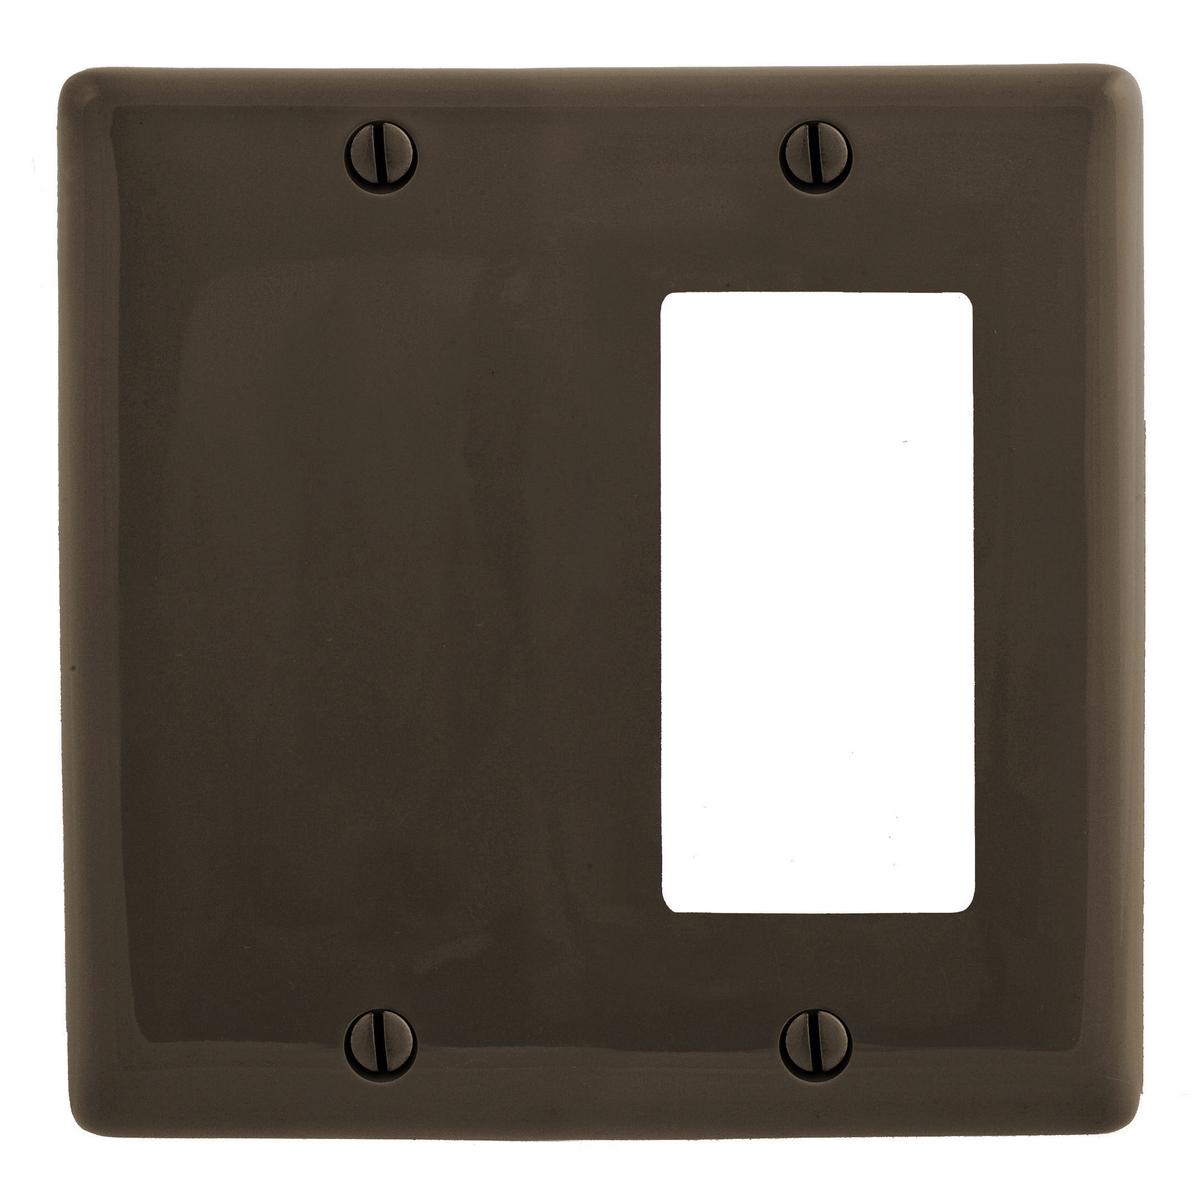 Hubbell NP1326 Wallplates and Box Covers, Wallplate, Nylon, 2-Gang, 1) Decorator 1) Blank, Brown  ; Reinforcement ribs for extra strength ; High-impact, self-extinguishing nylon material ; Captive screw feature holds mounting screw in place ; Standard Size is 1/8" large